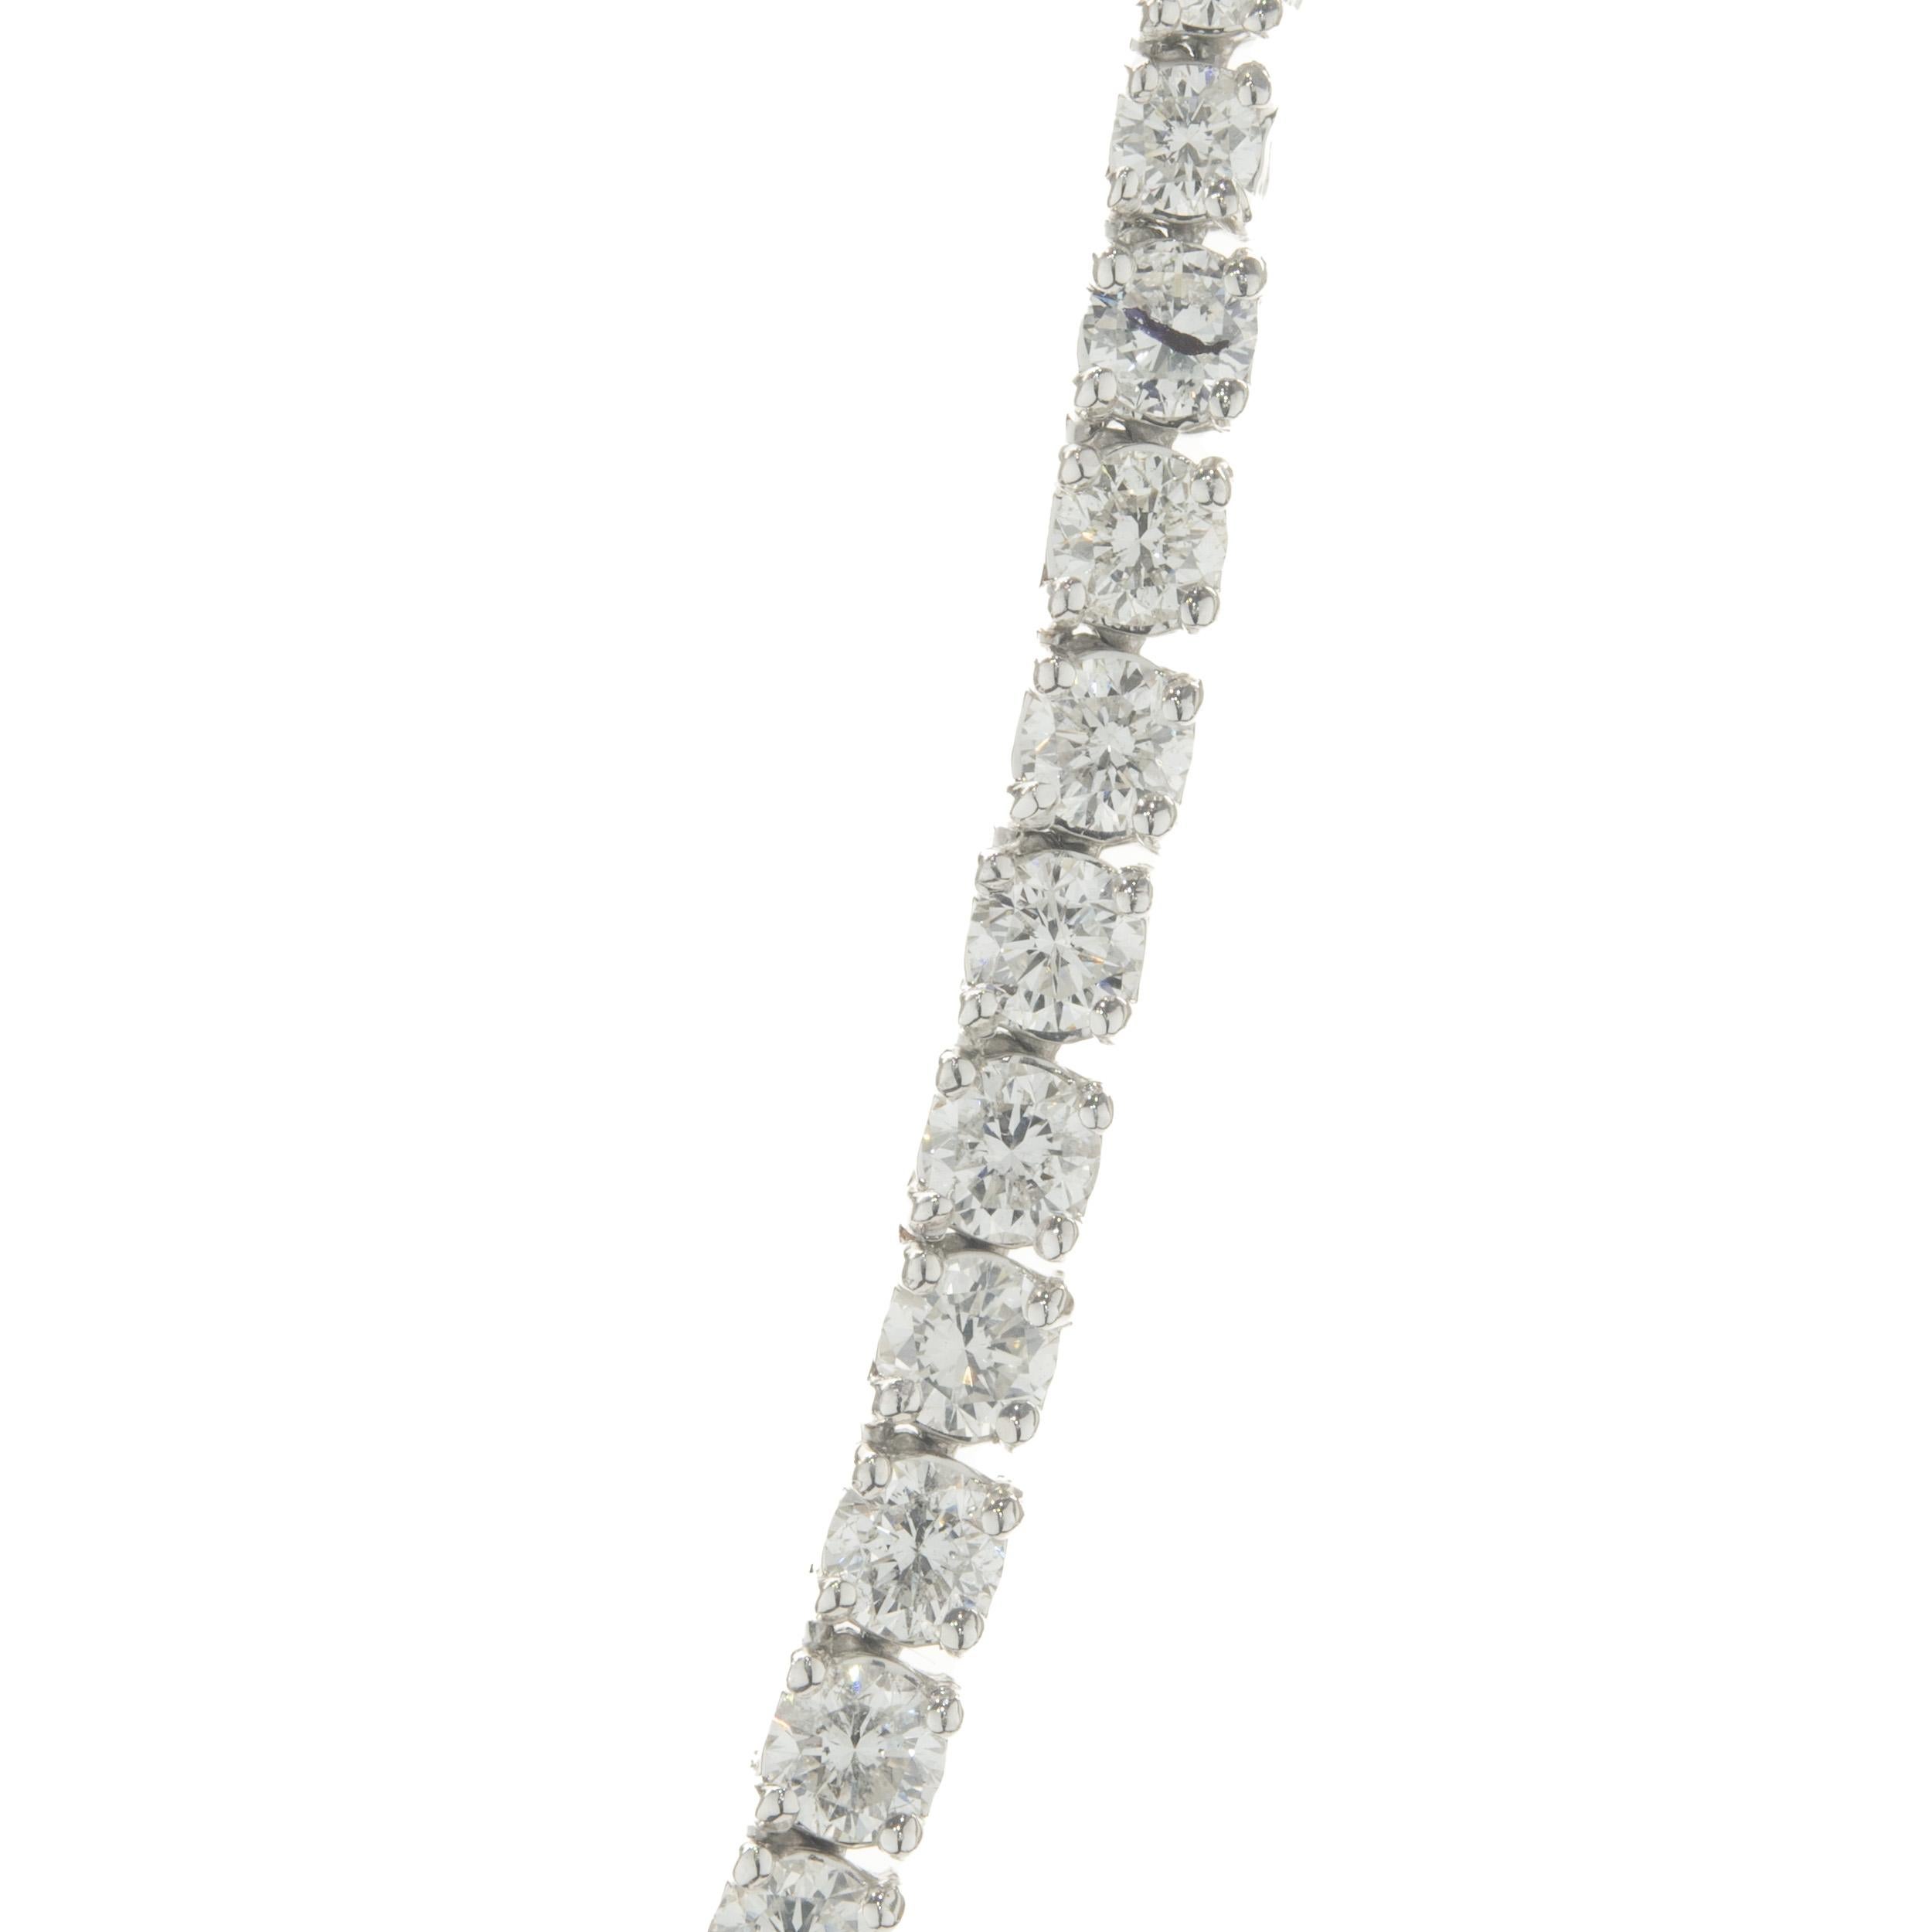 Designer: custom design
Material: 14K white gold
Diamond: 107 round brilliant cut = 10.39cttw
Color: G / H
Clarity: SI1
Dimensions: necklace measures 15-inches in length 
Weight: 41.67 grams